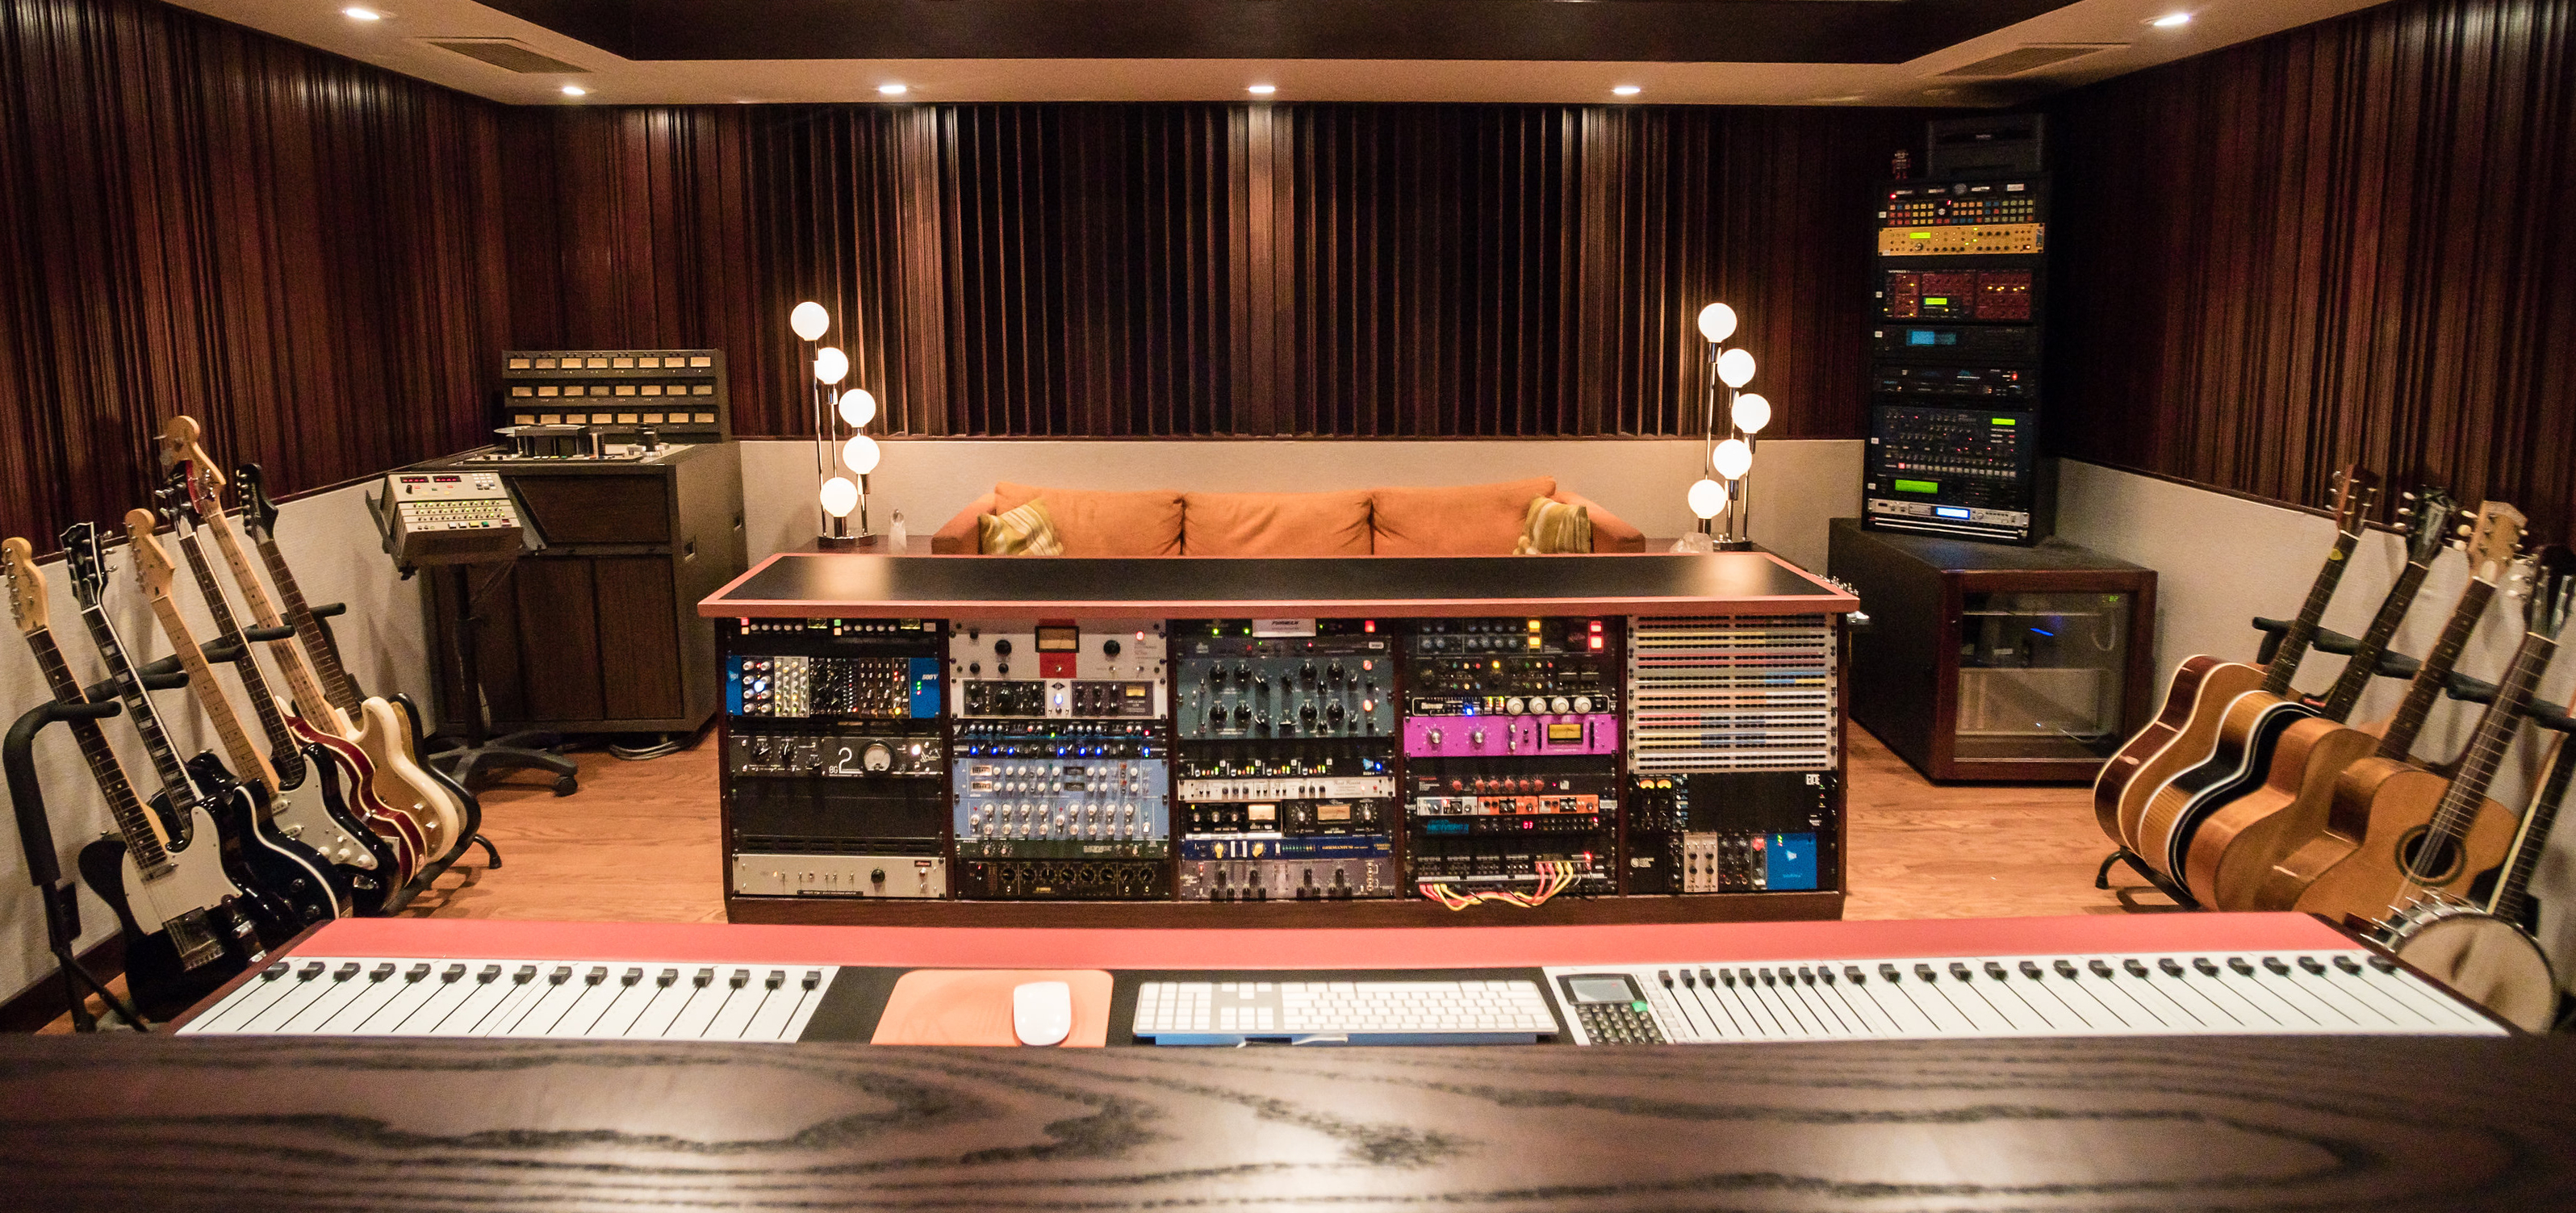 State-Of-The-Art Recording Studio with 1970's Vibe Hidden Away in Hip  Neighborhood, San Diego, CA | Production | Peerspace